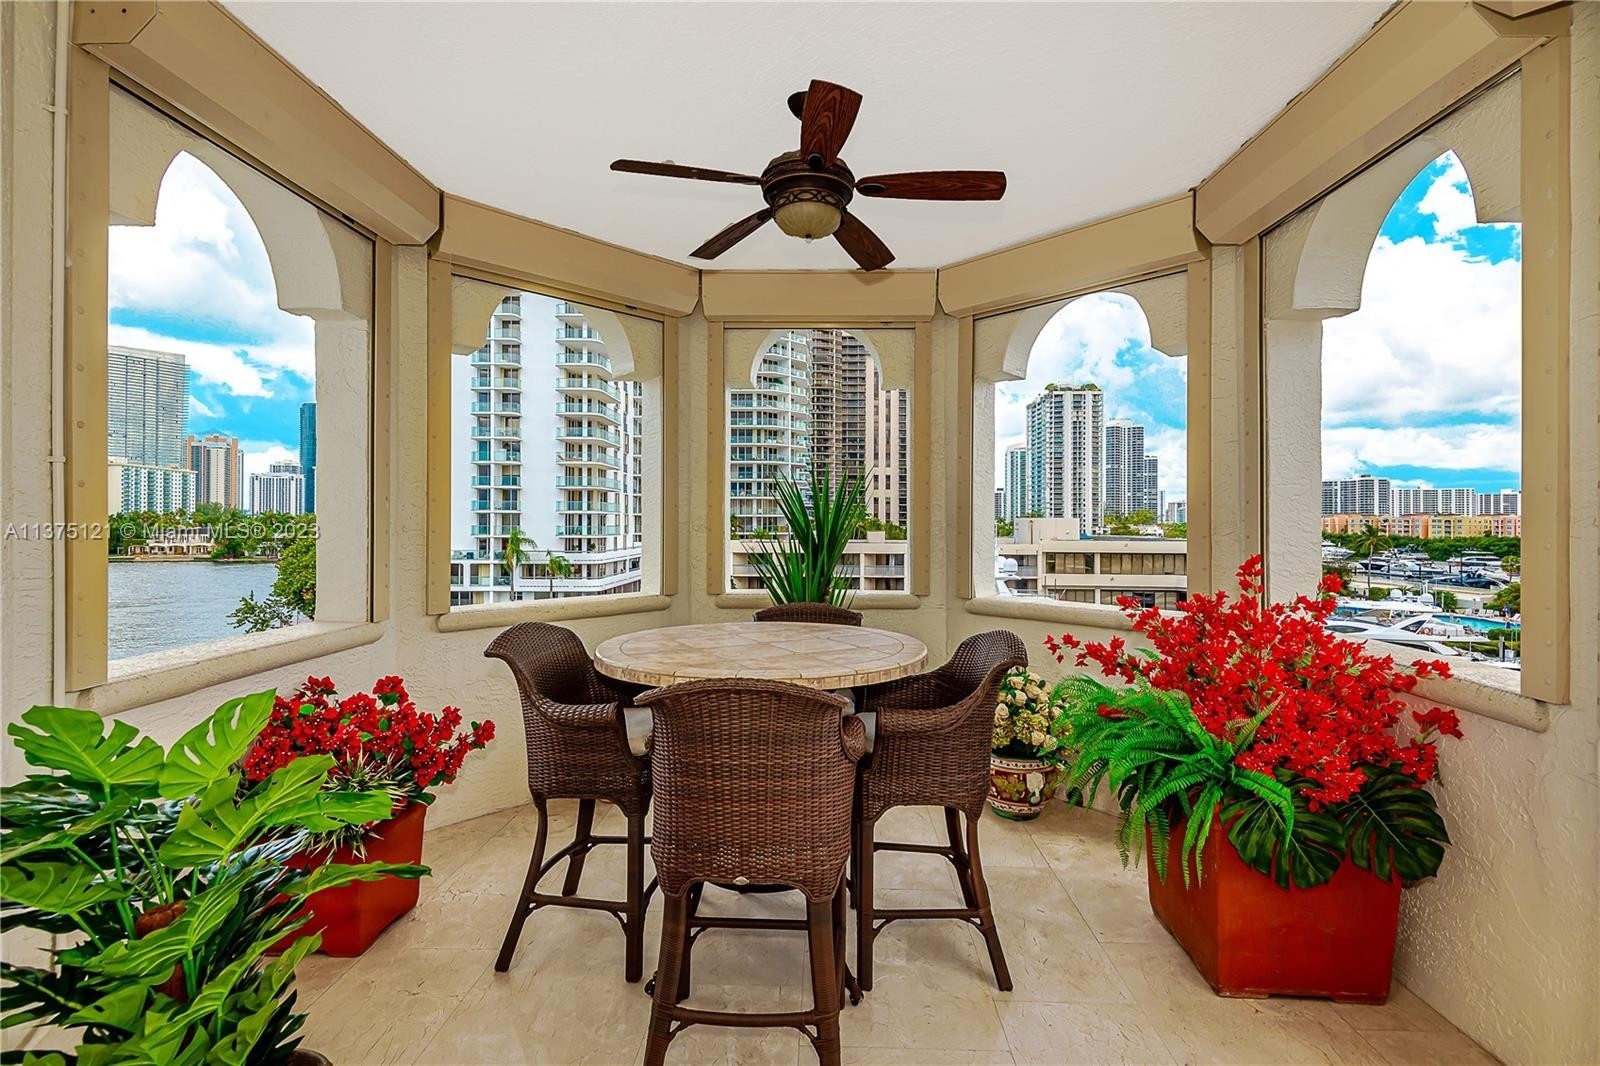 3. Condominiums for Sale at 19925 NE 39th Pl, 404 Biscayne Yacht and Country Club, Aventura, FL 33180